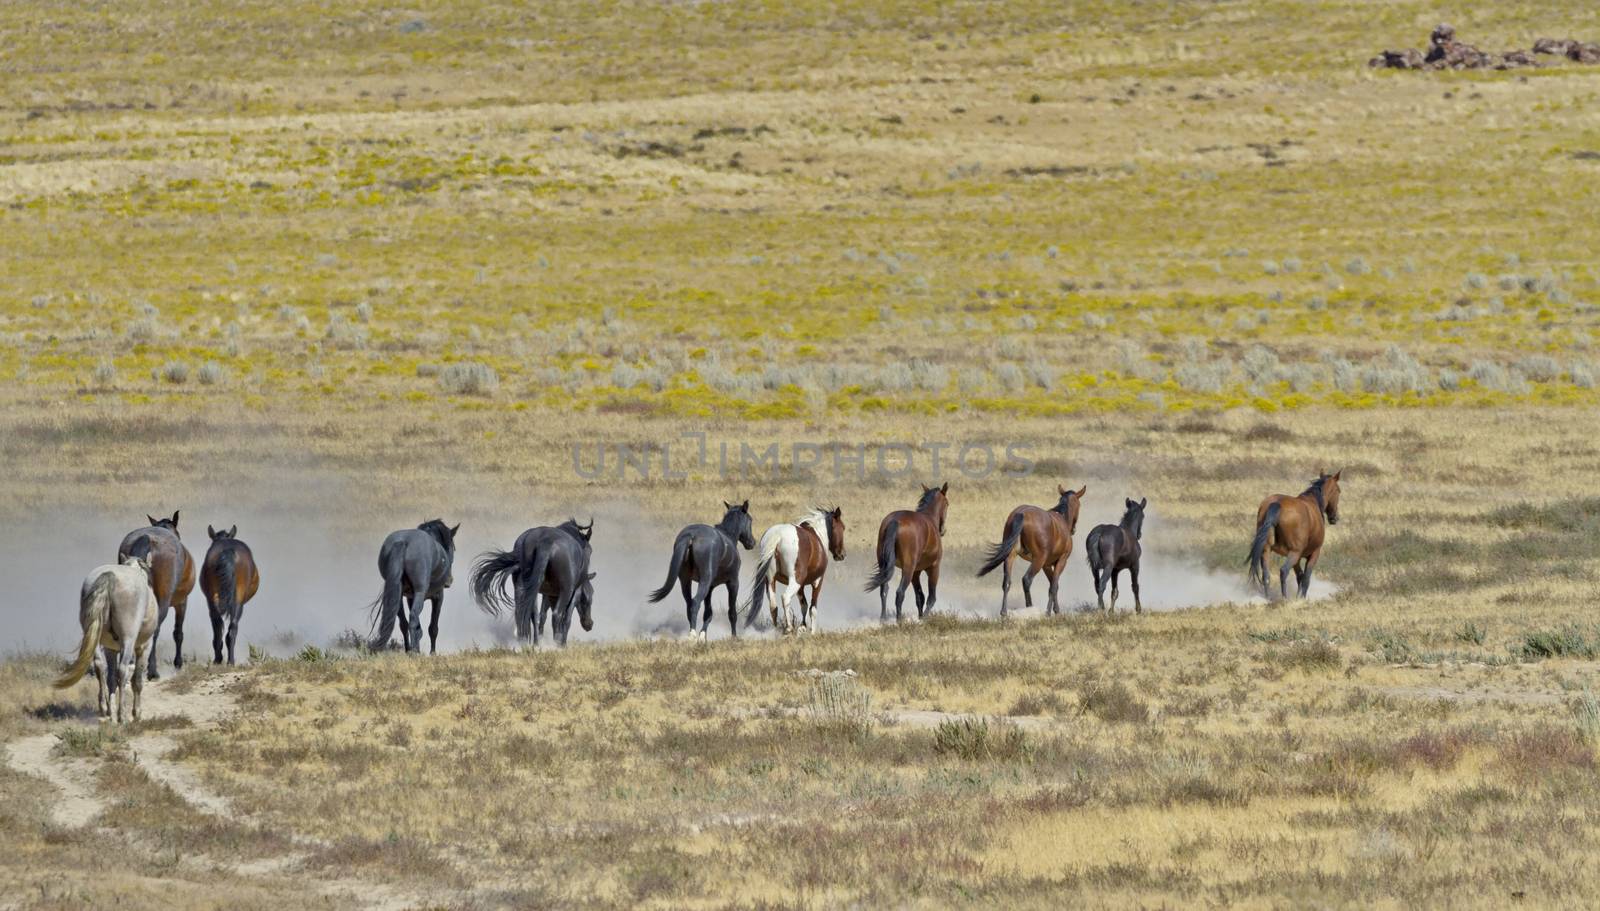 Herd of wild horses run in a line in Utah's Onaqui Horse Management Area managed by the federal Bureau of Land Management.  Lead stallion at front of line. Their hooves stir up dry sand.  Horizontal image with copy space and no people. 